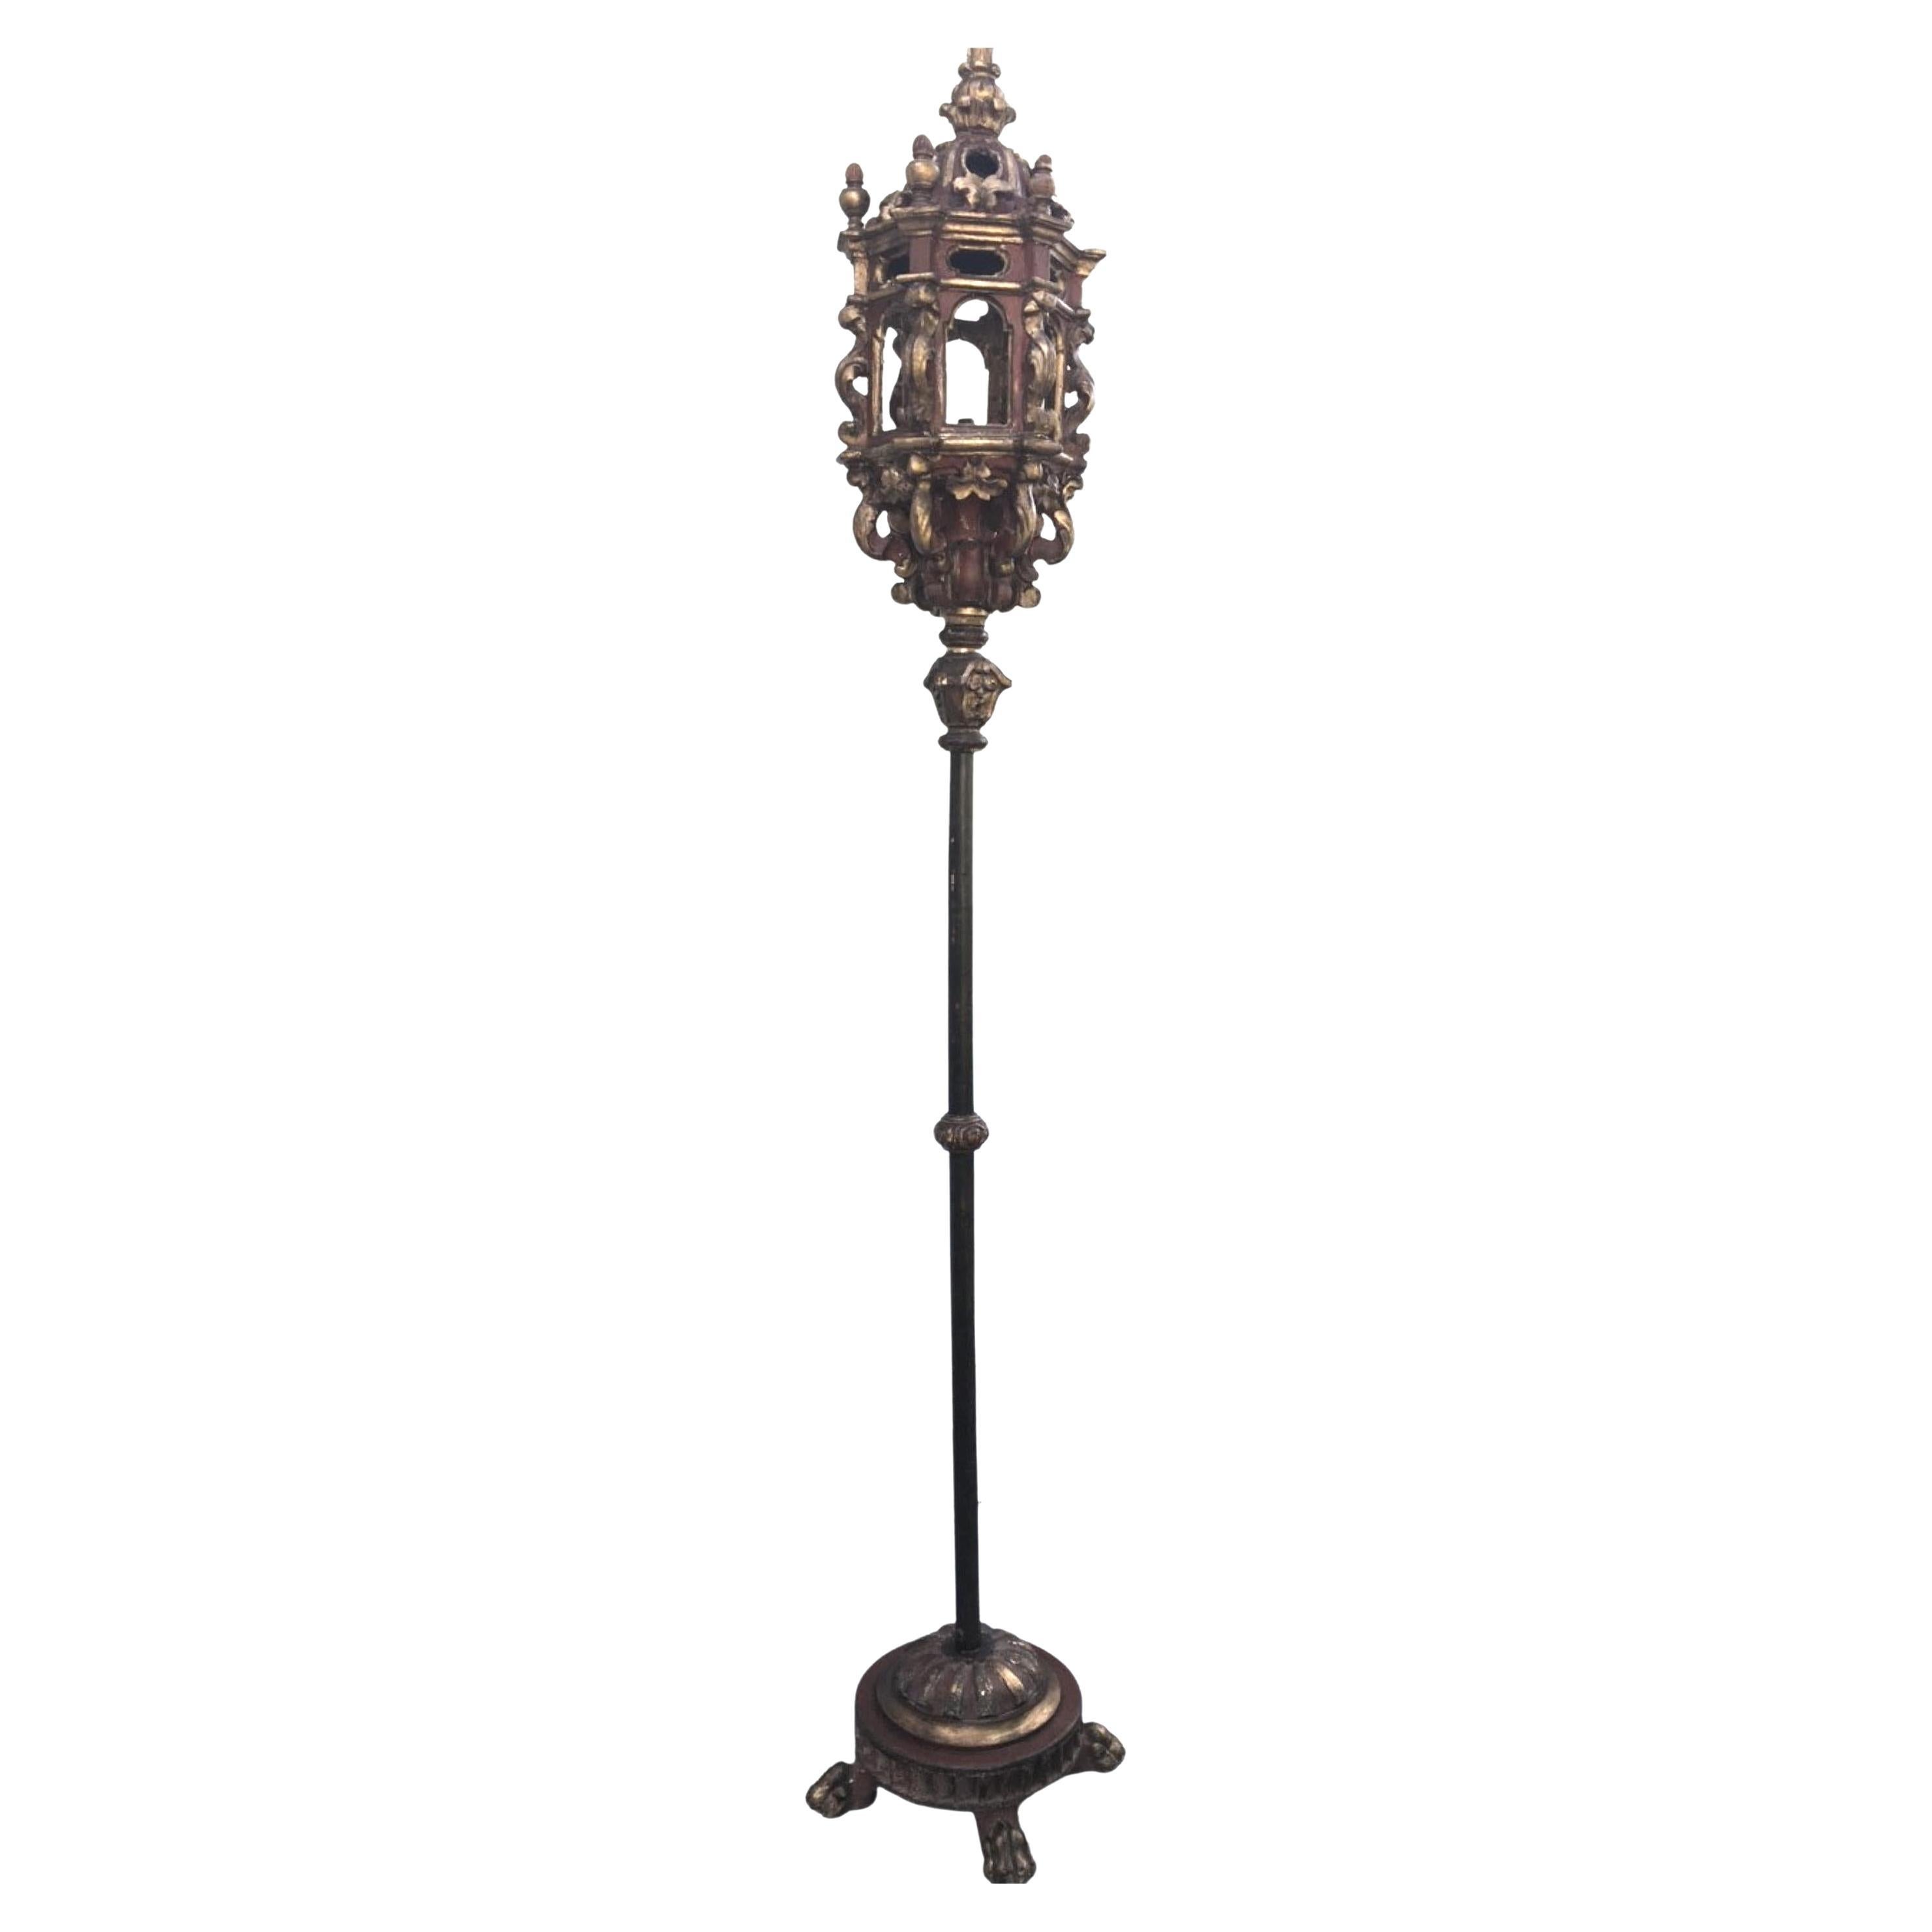 17th Century Large Six Sided Venetian Carved Gilded Baroque Hall Lantern